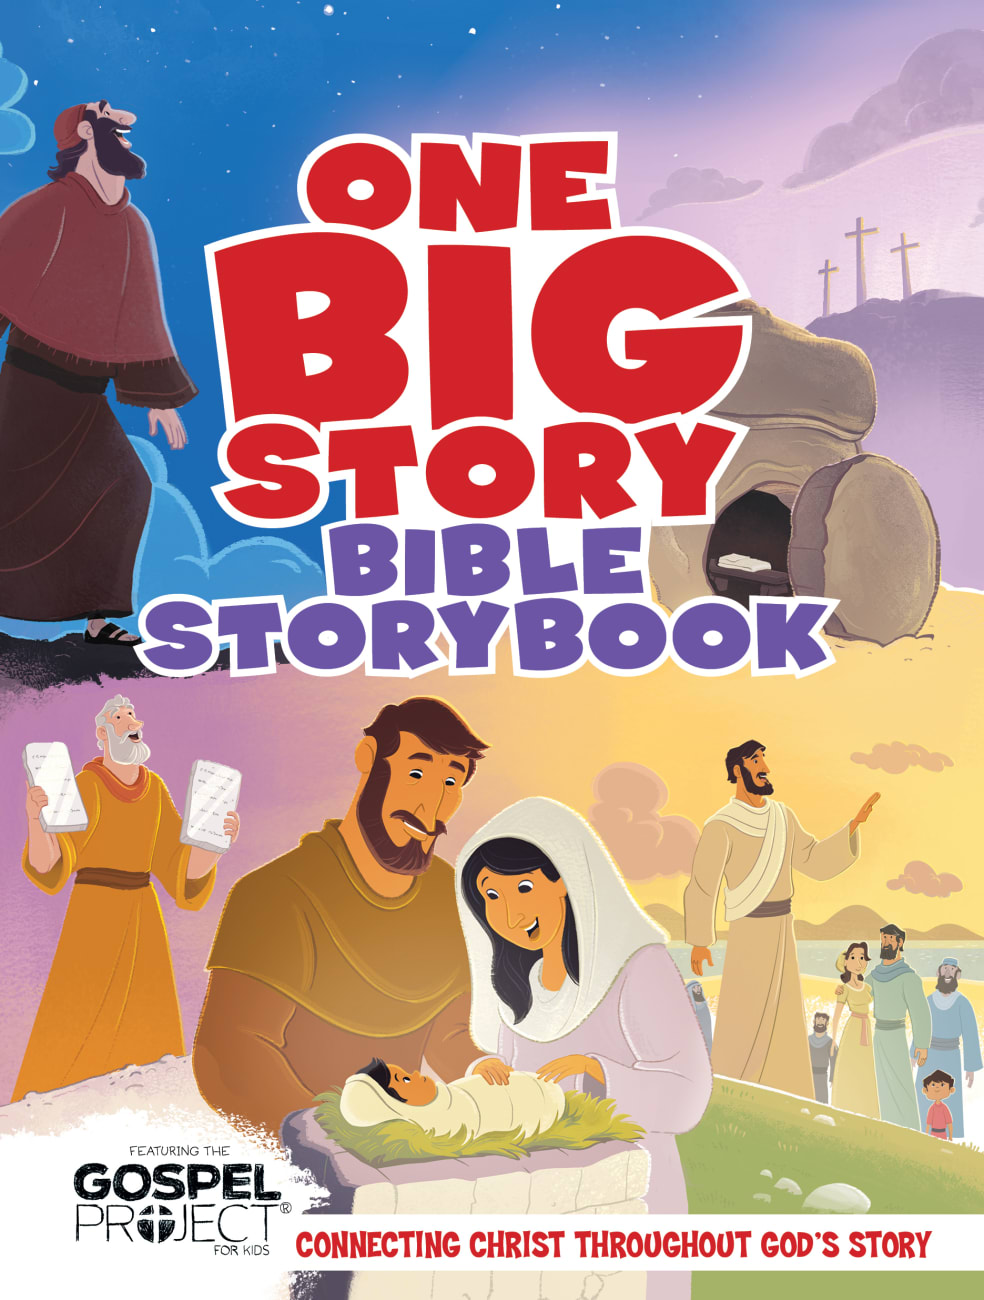 One Big Story Bible Storybook: Connecting Christ Throughout God's Story Hardback